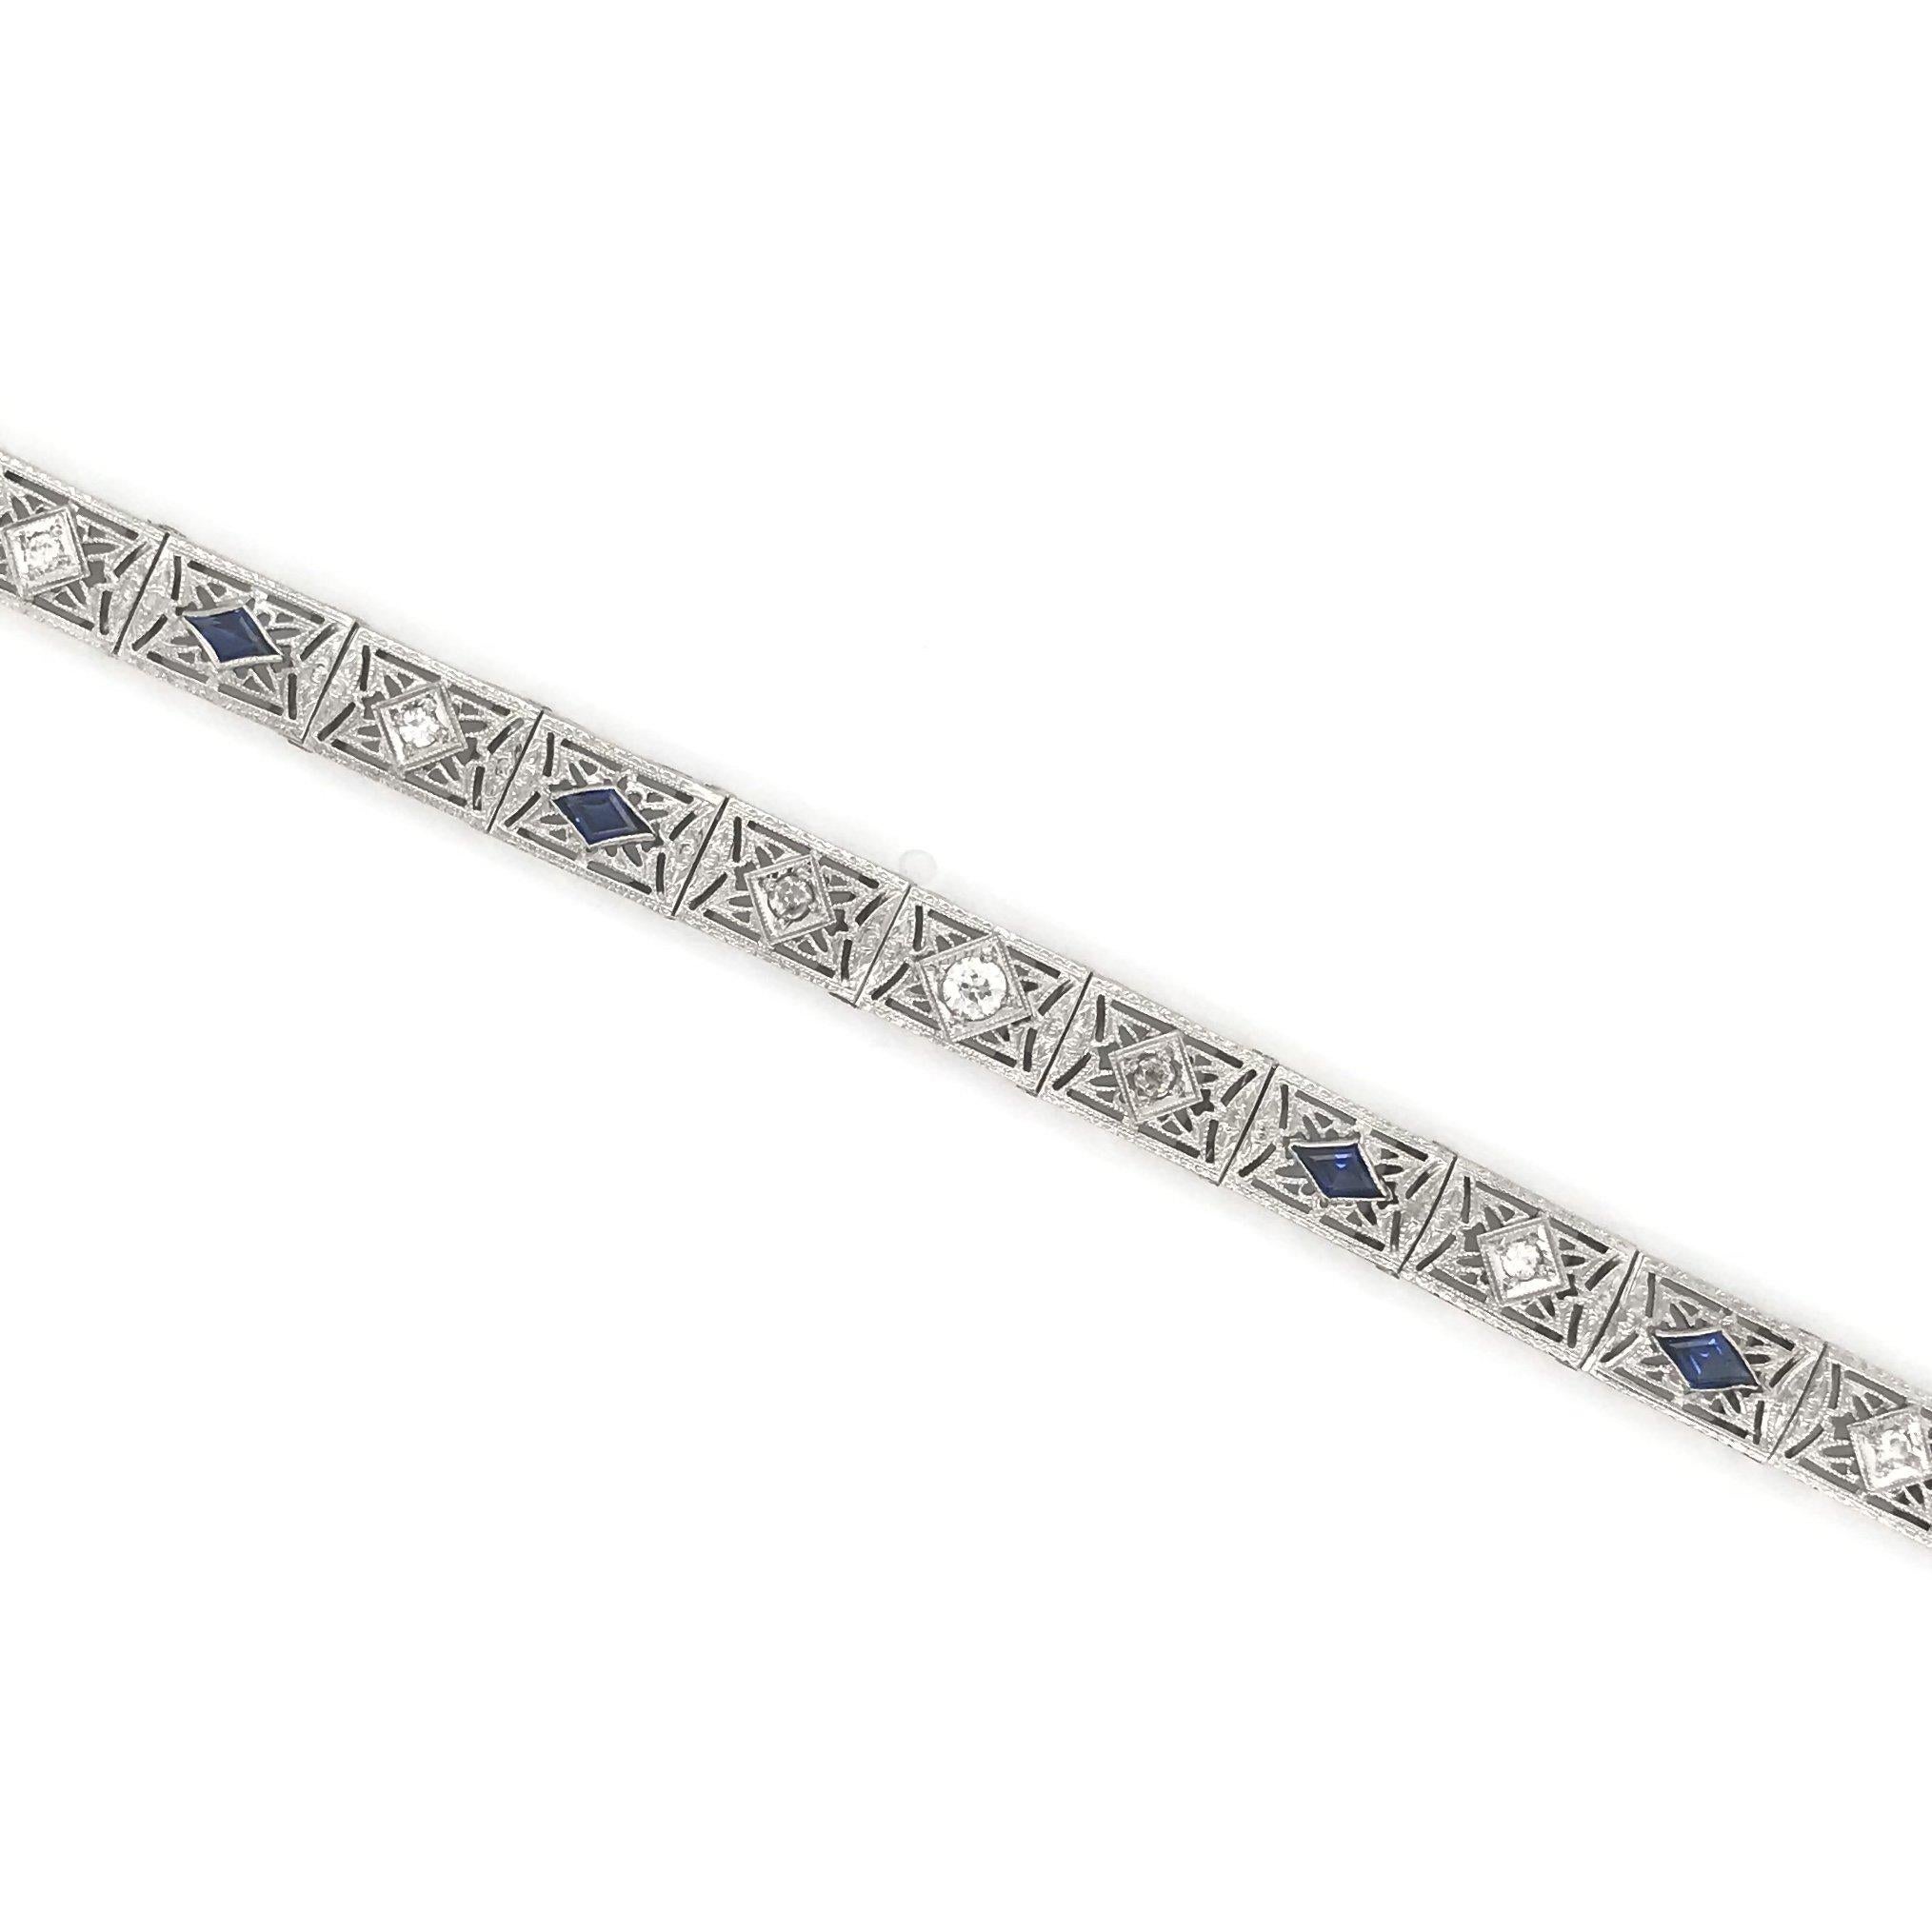 This antique piece was handcrafted sometime during the Art Deco design period ( 1920-1940 ). The setting is 10k white gold. The bracelet is comprised of 18 filigree links, 7 of which have a small diamond accent and 4 have a deep blue sapphire